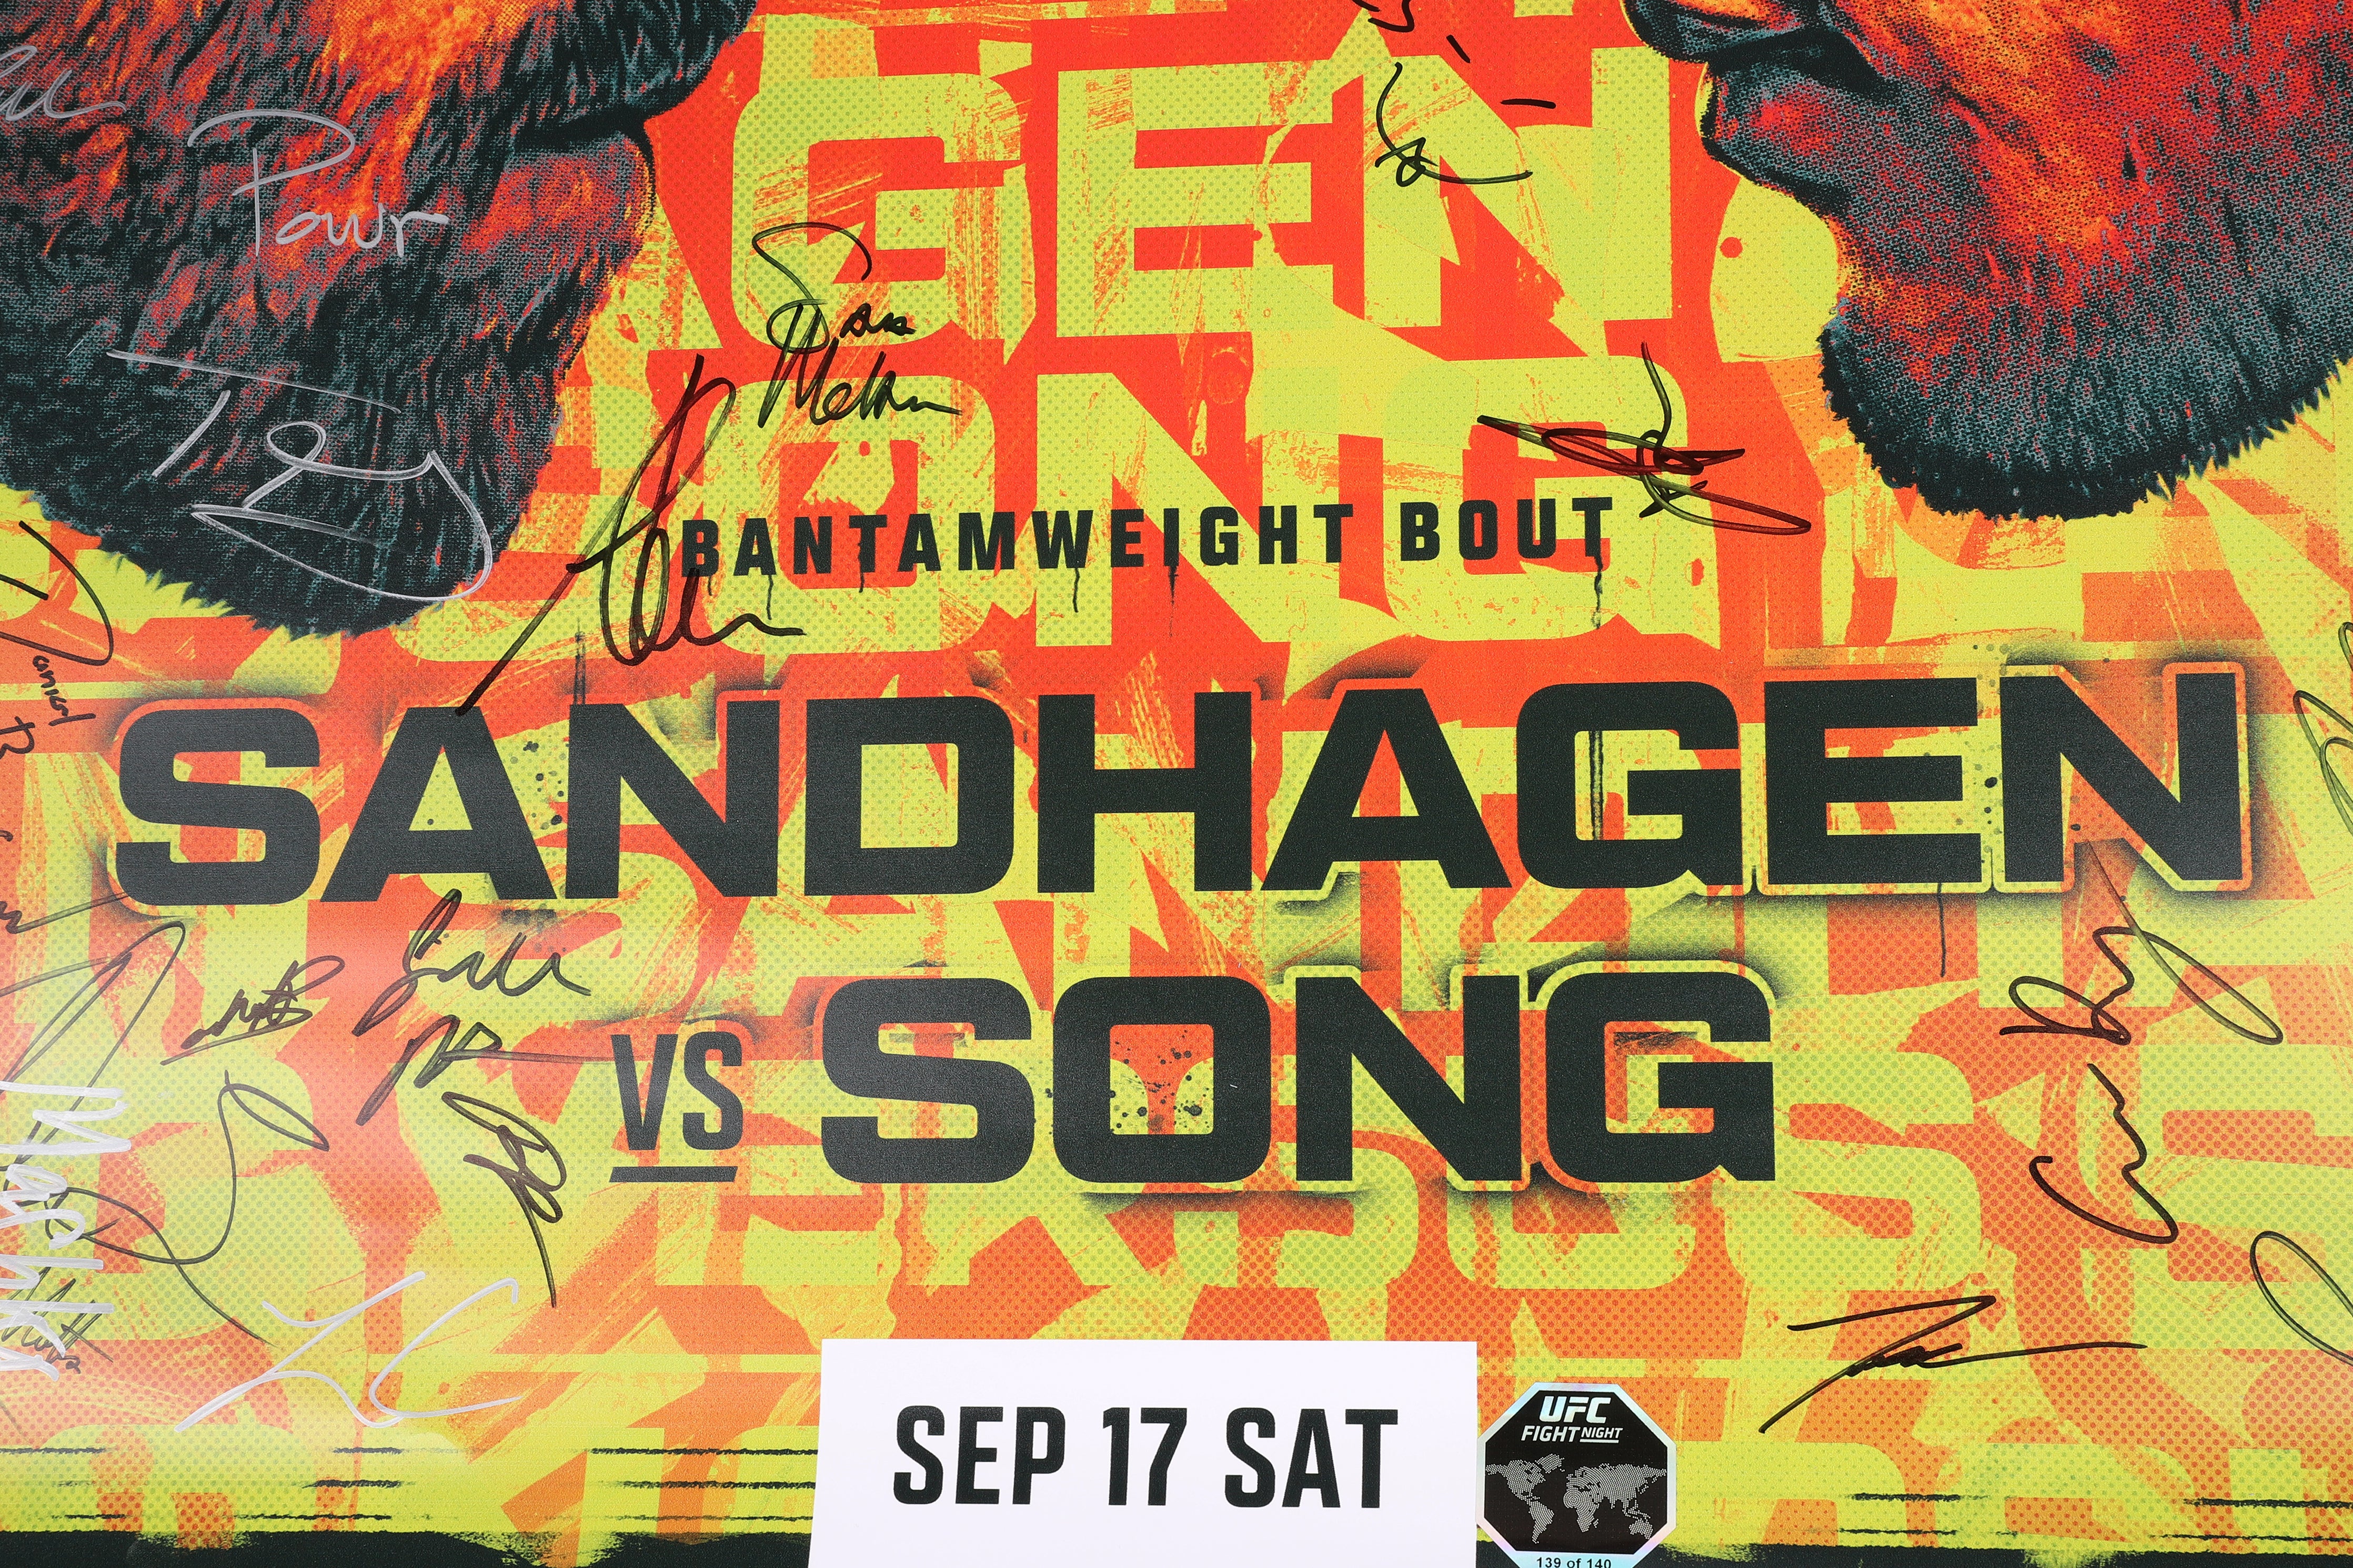 UFC Fight Night: Sandhagen vs Song Autographed Event Poster